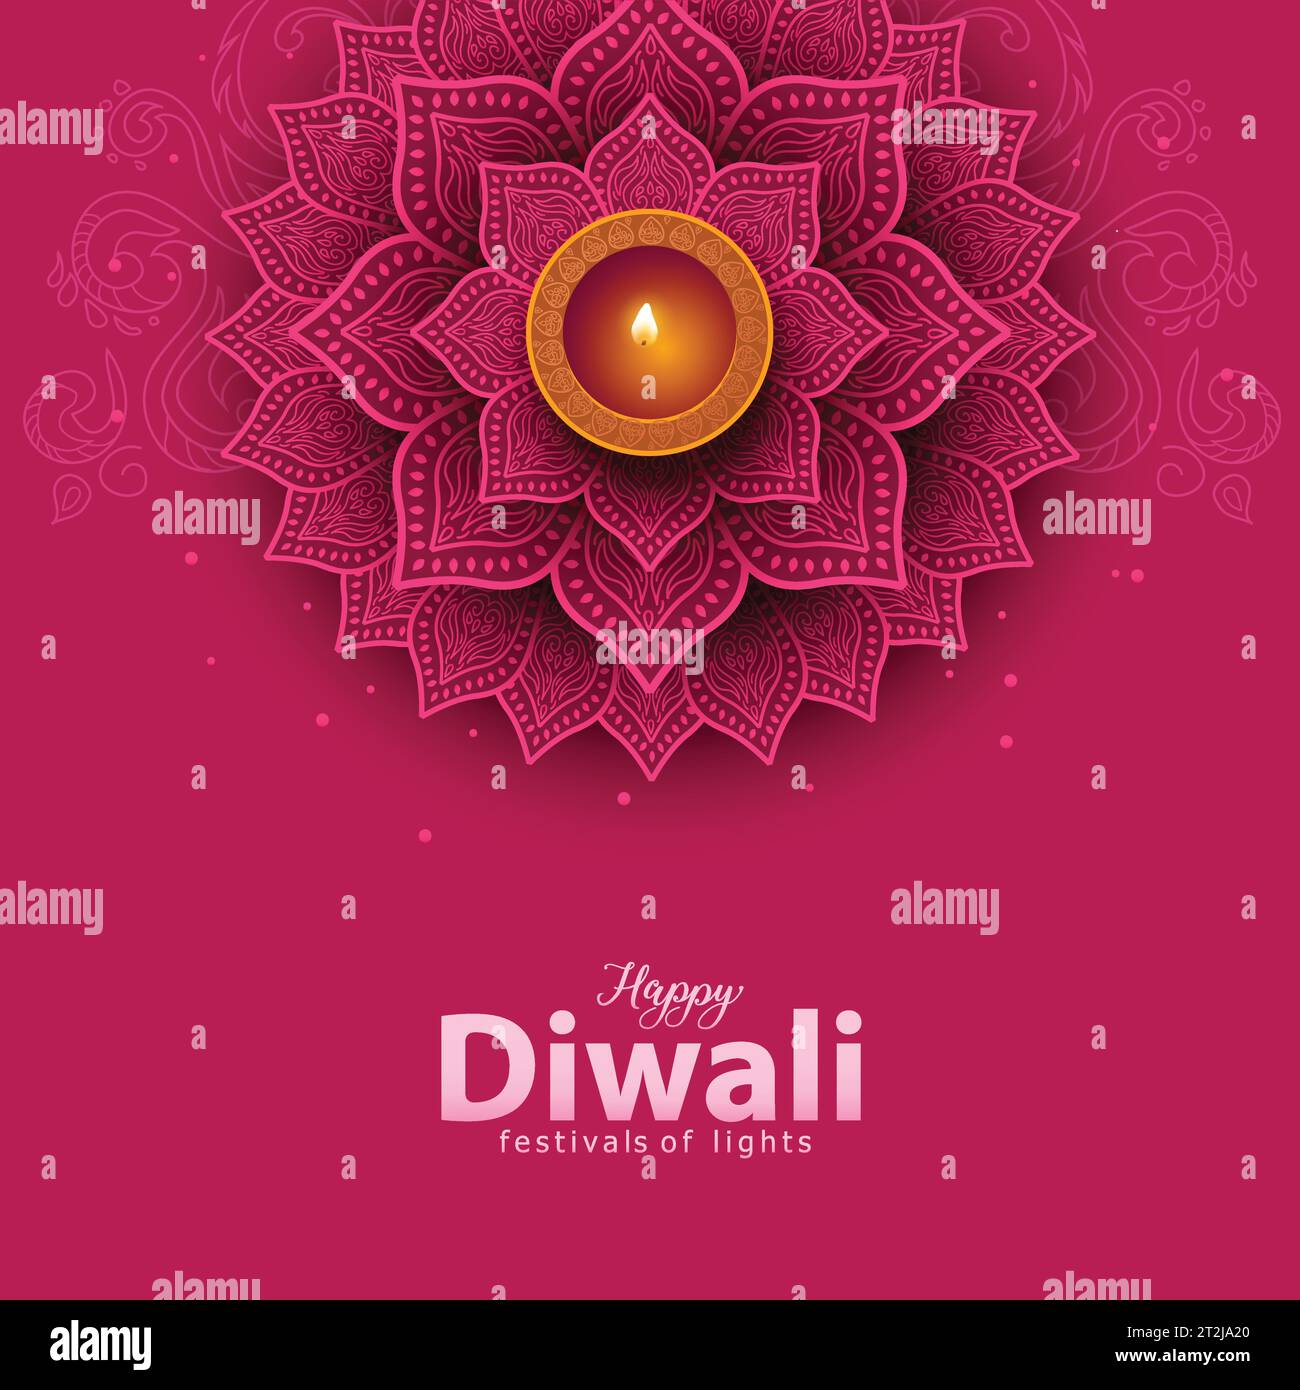 Indian festival Happy Diwali celebration background. Top view of banner design decorated with illuminated oil lamps on patterned background. abstract Stock Vector